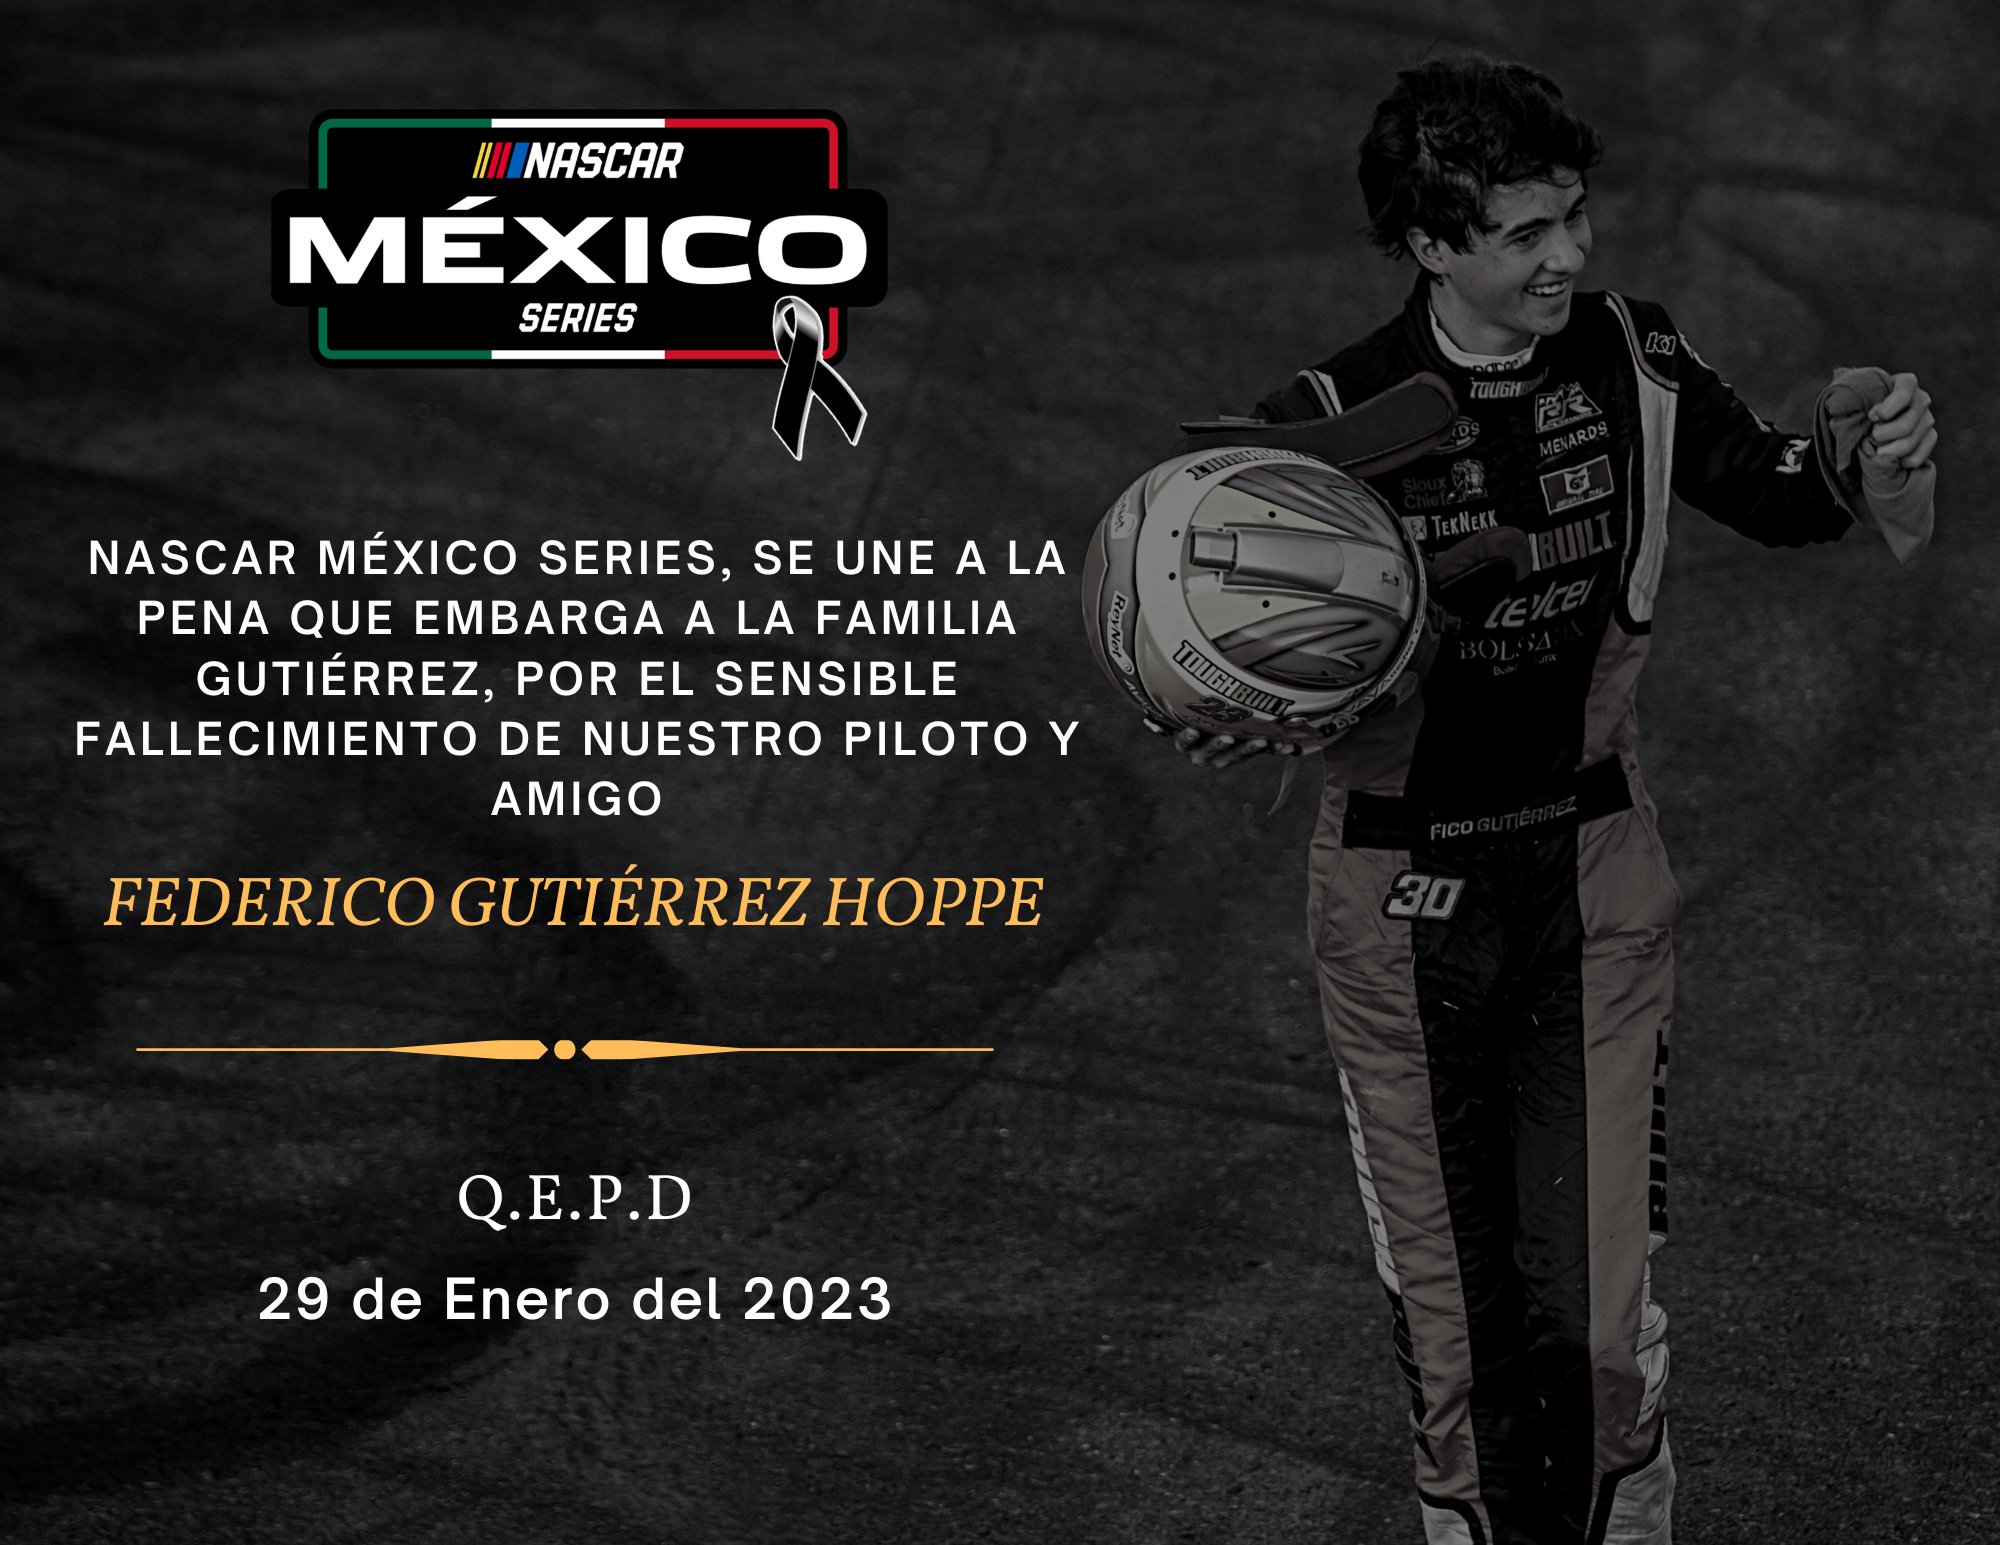 Nascar Mexico mourned the death of "fico" Gutierrez (Twitter/ @NASCARMex)